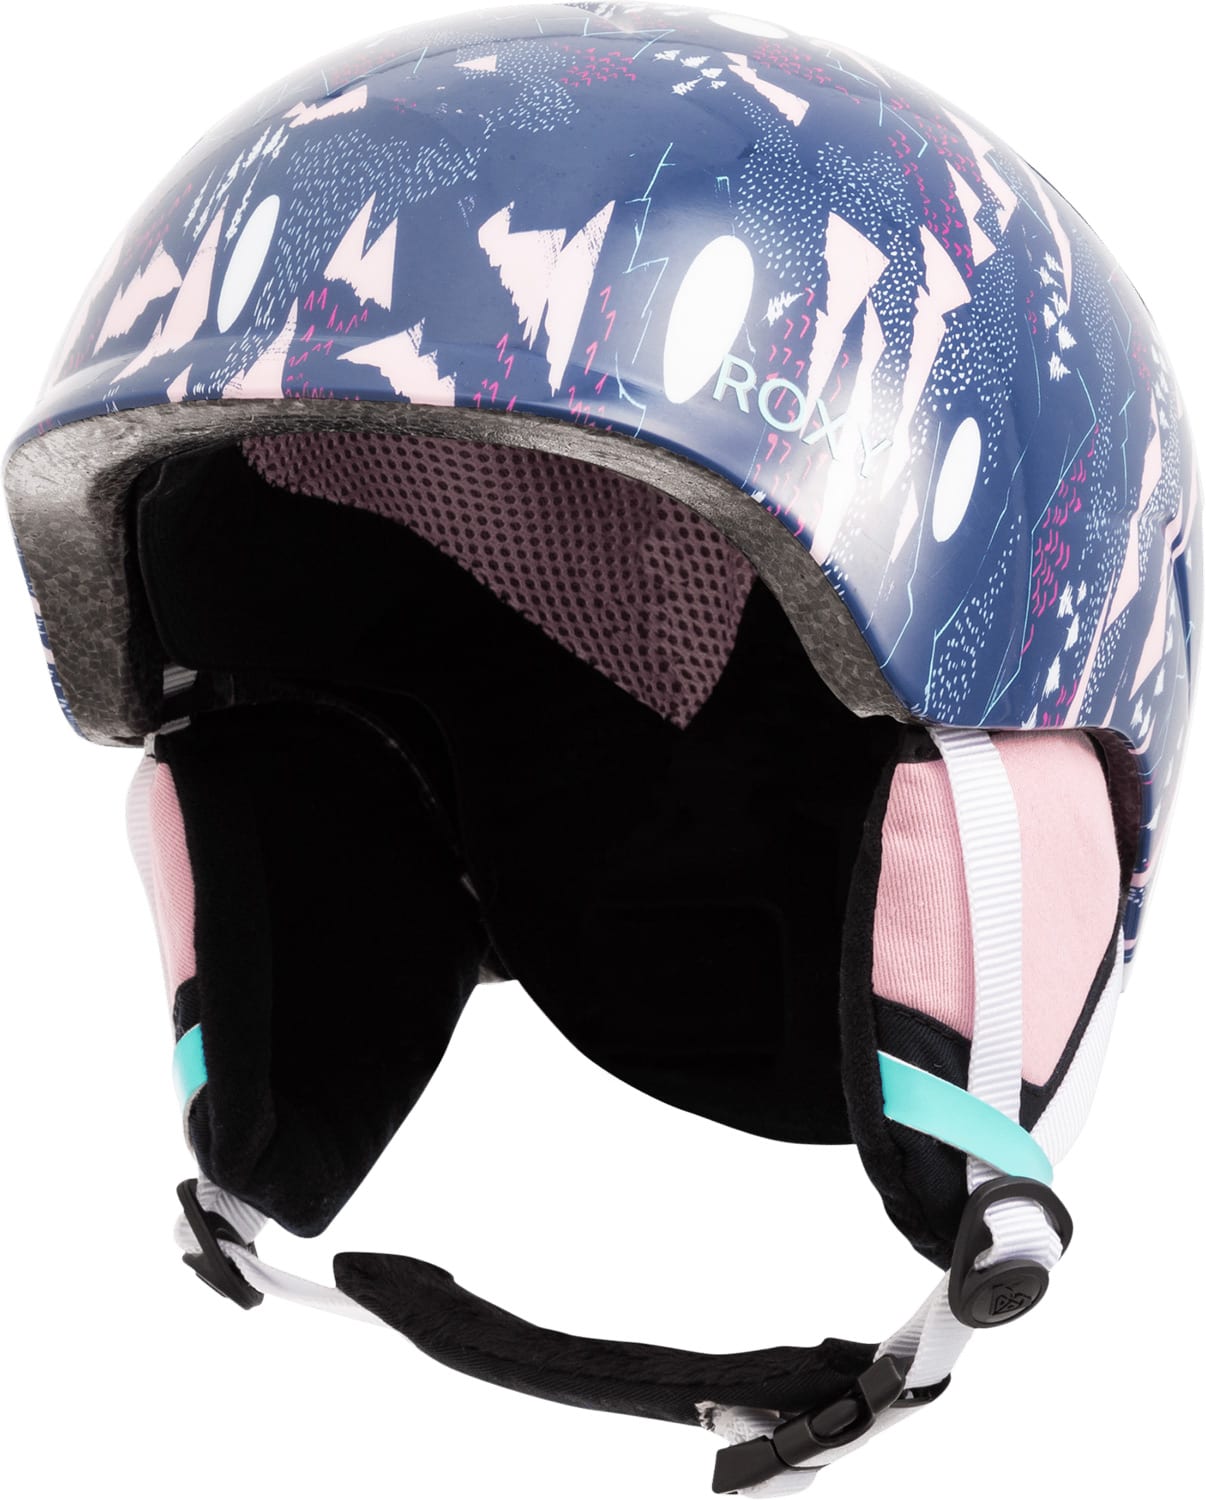 Great of Slush Snow Helmet Girls Outlet - reliable quality skisroxy